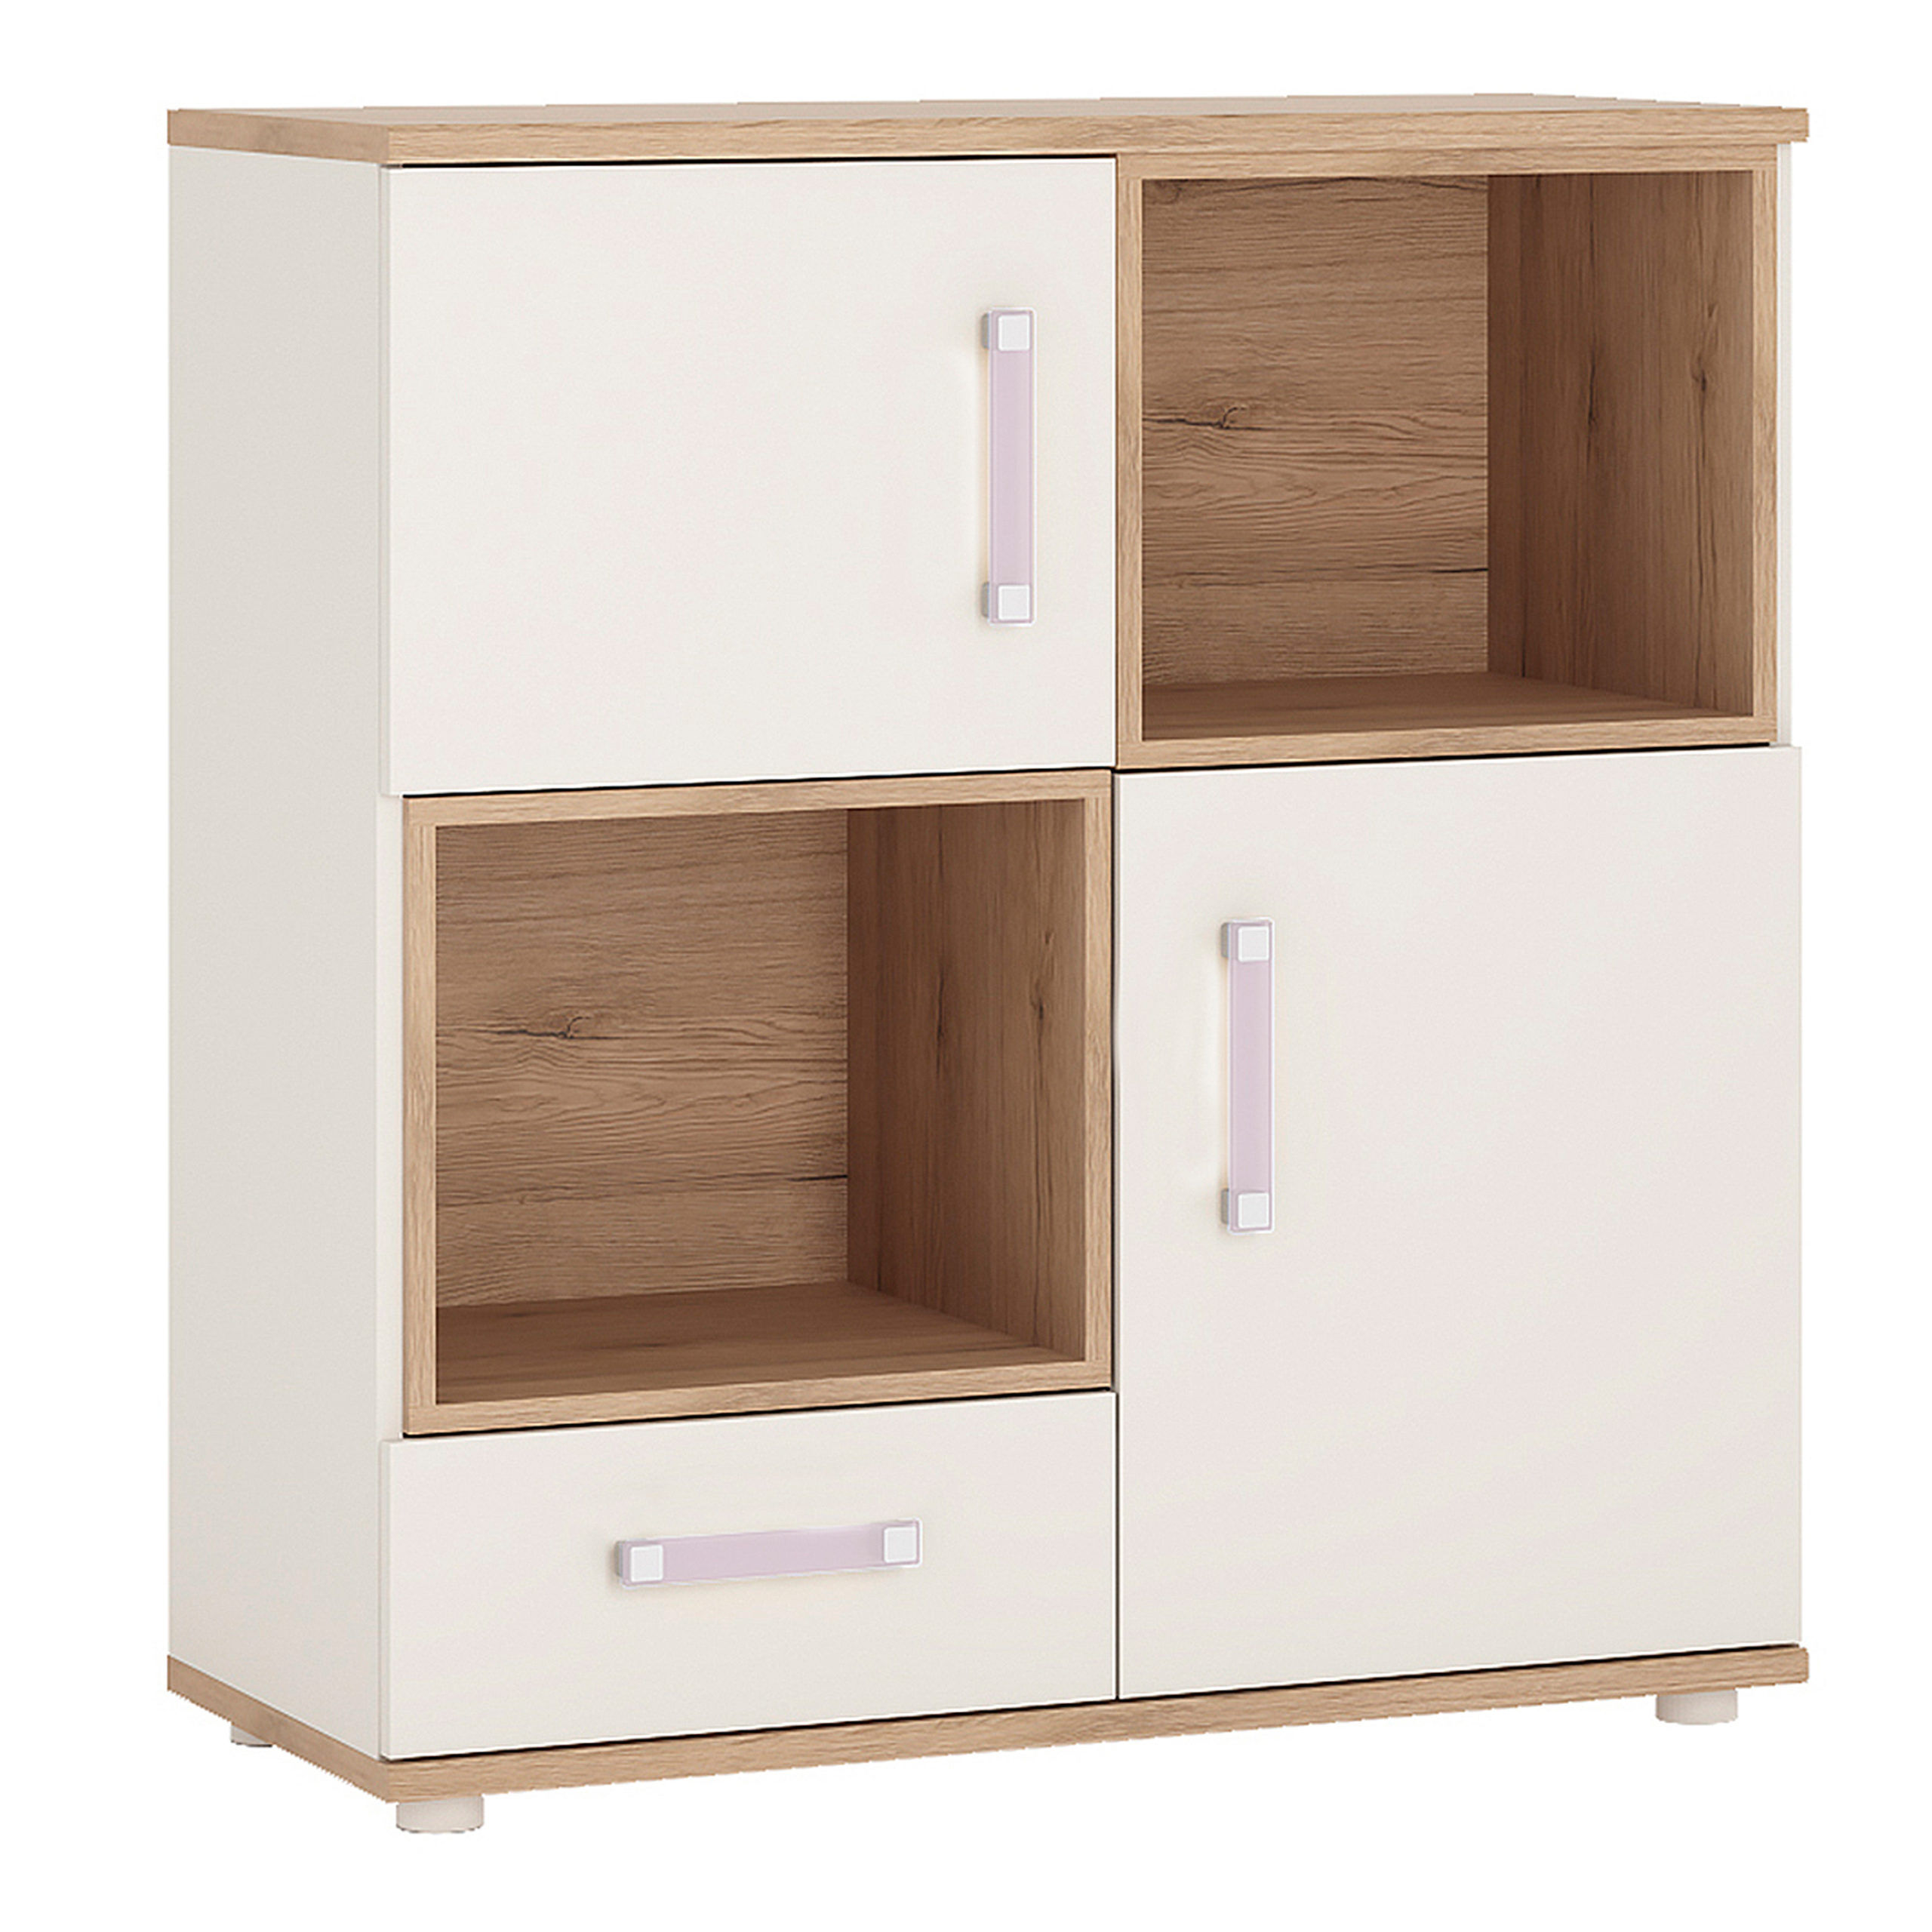 Junior White 2 Door 1 Drawer Cupboard with 2 Open Shelves   Self Assembly Childrens Furniture